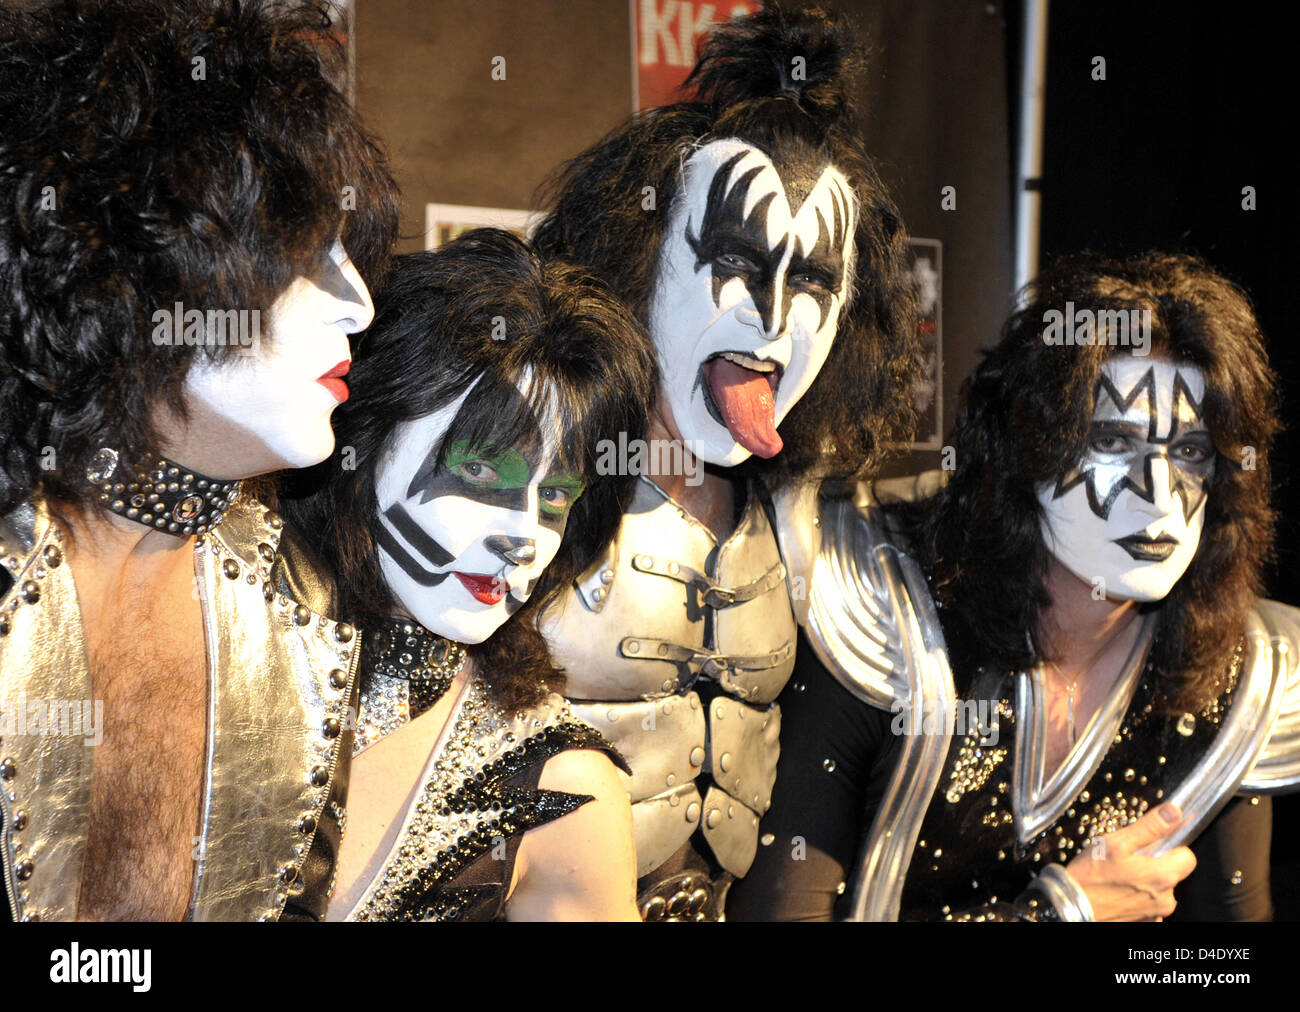 Kiss Band High Resolution Stock Photography and Images - Alamy